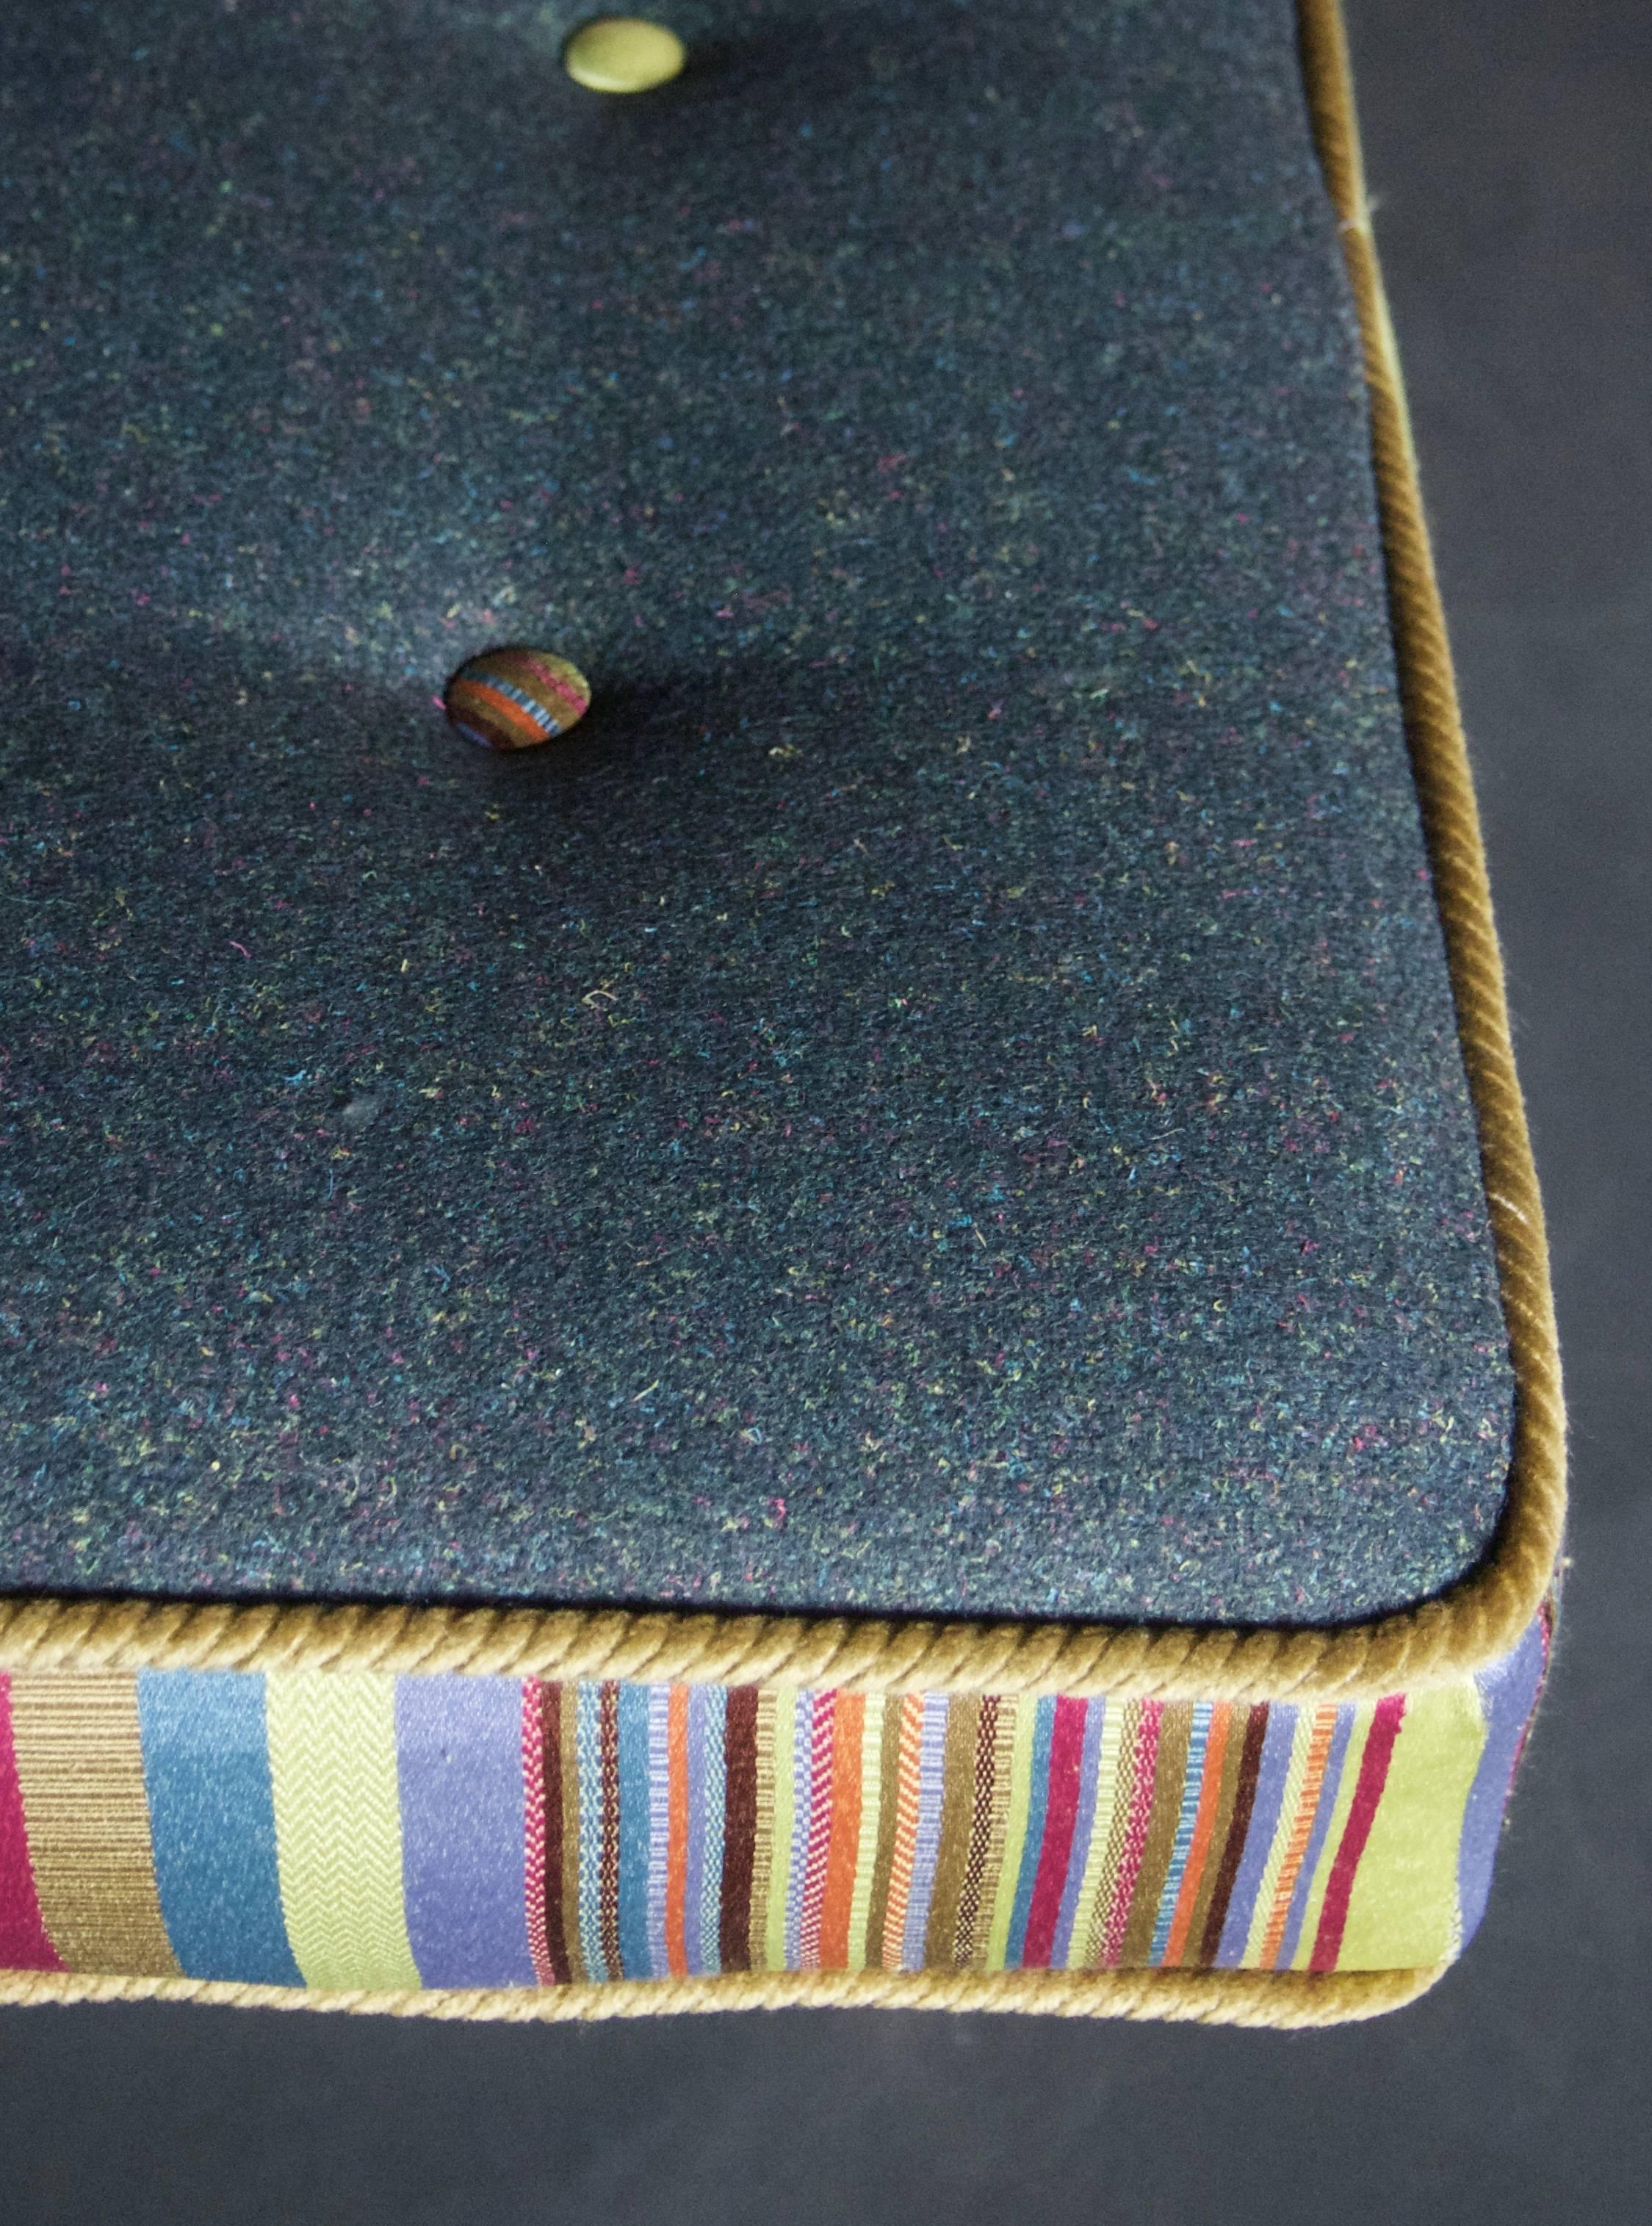 This upholstered bench is handmade using traditional European upholstery techniques, and tufted with 14 colorful buttons. The seat top is charcoal gray flecked with colorful threads, surrounded by a bold vertical stripe on the boxing (side panels).